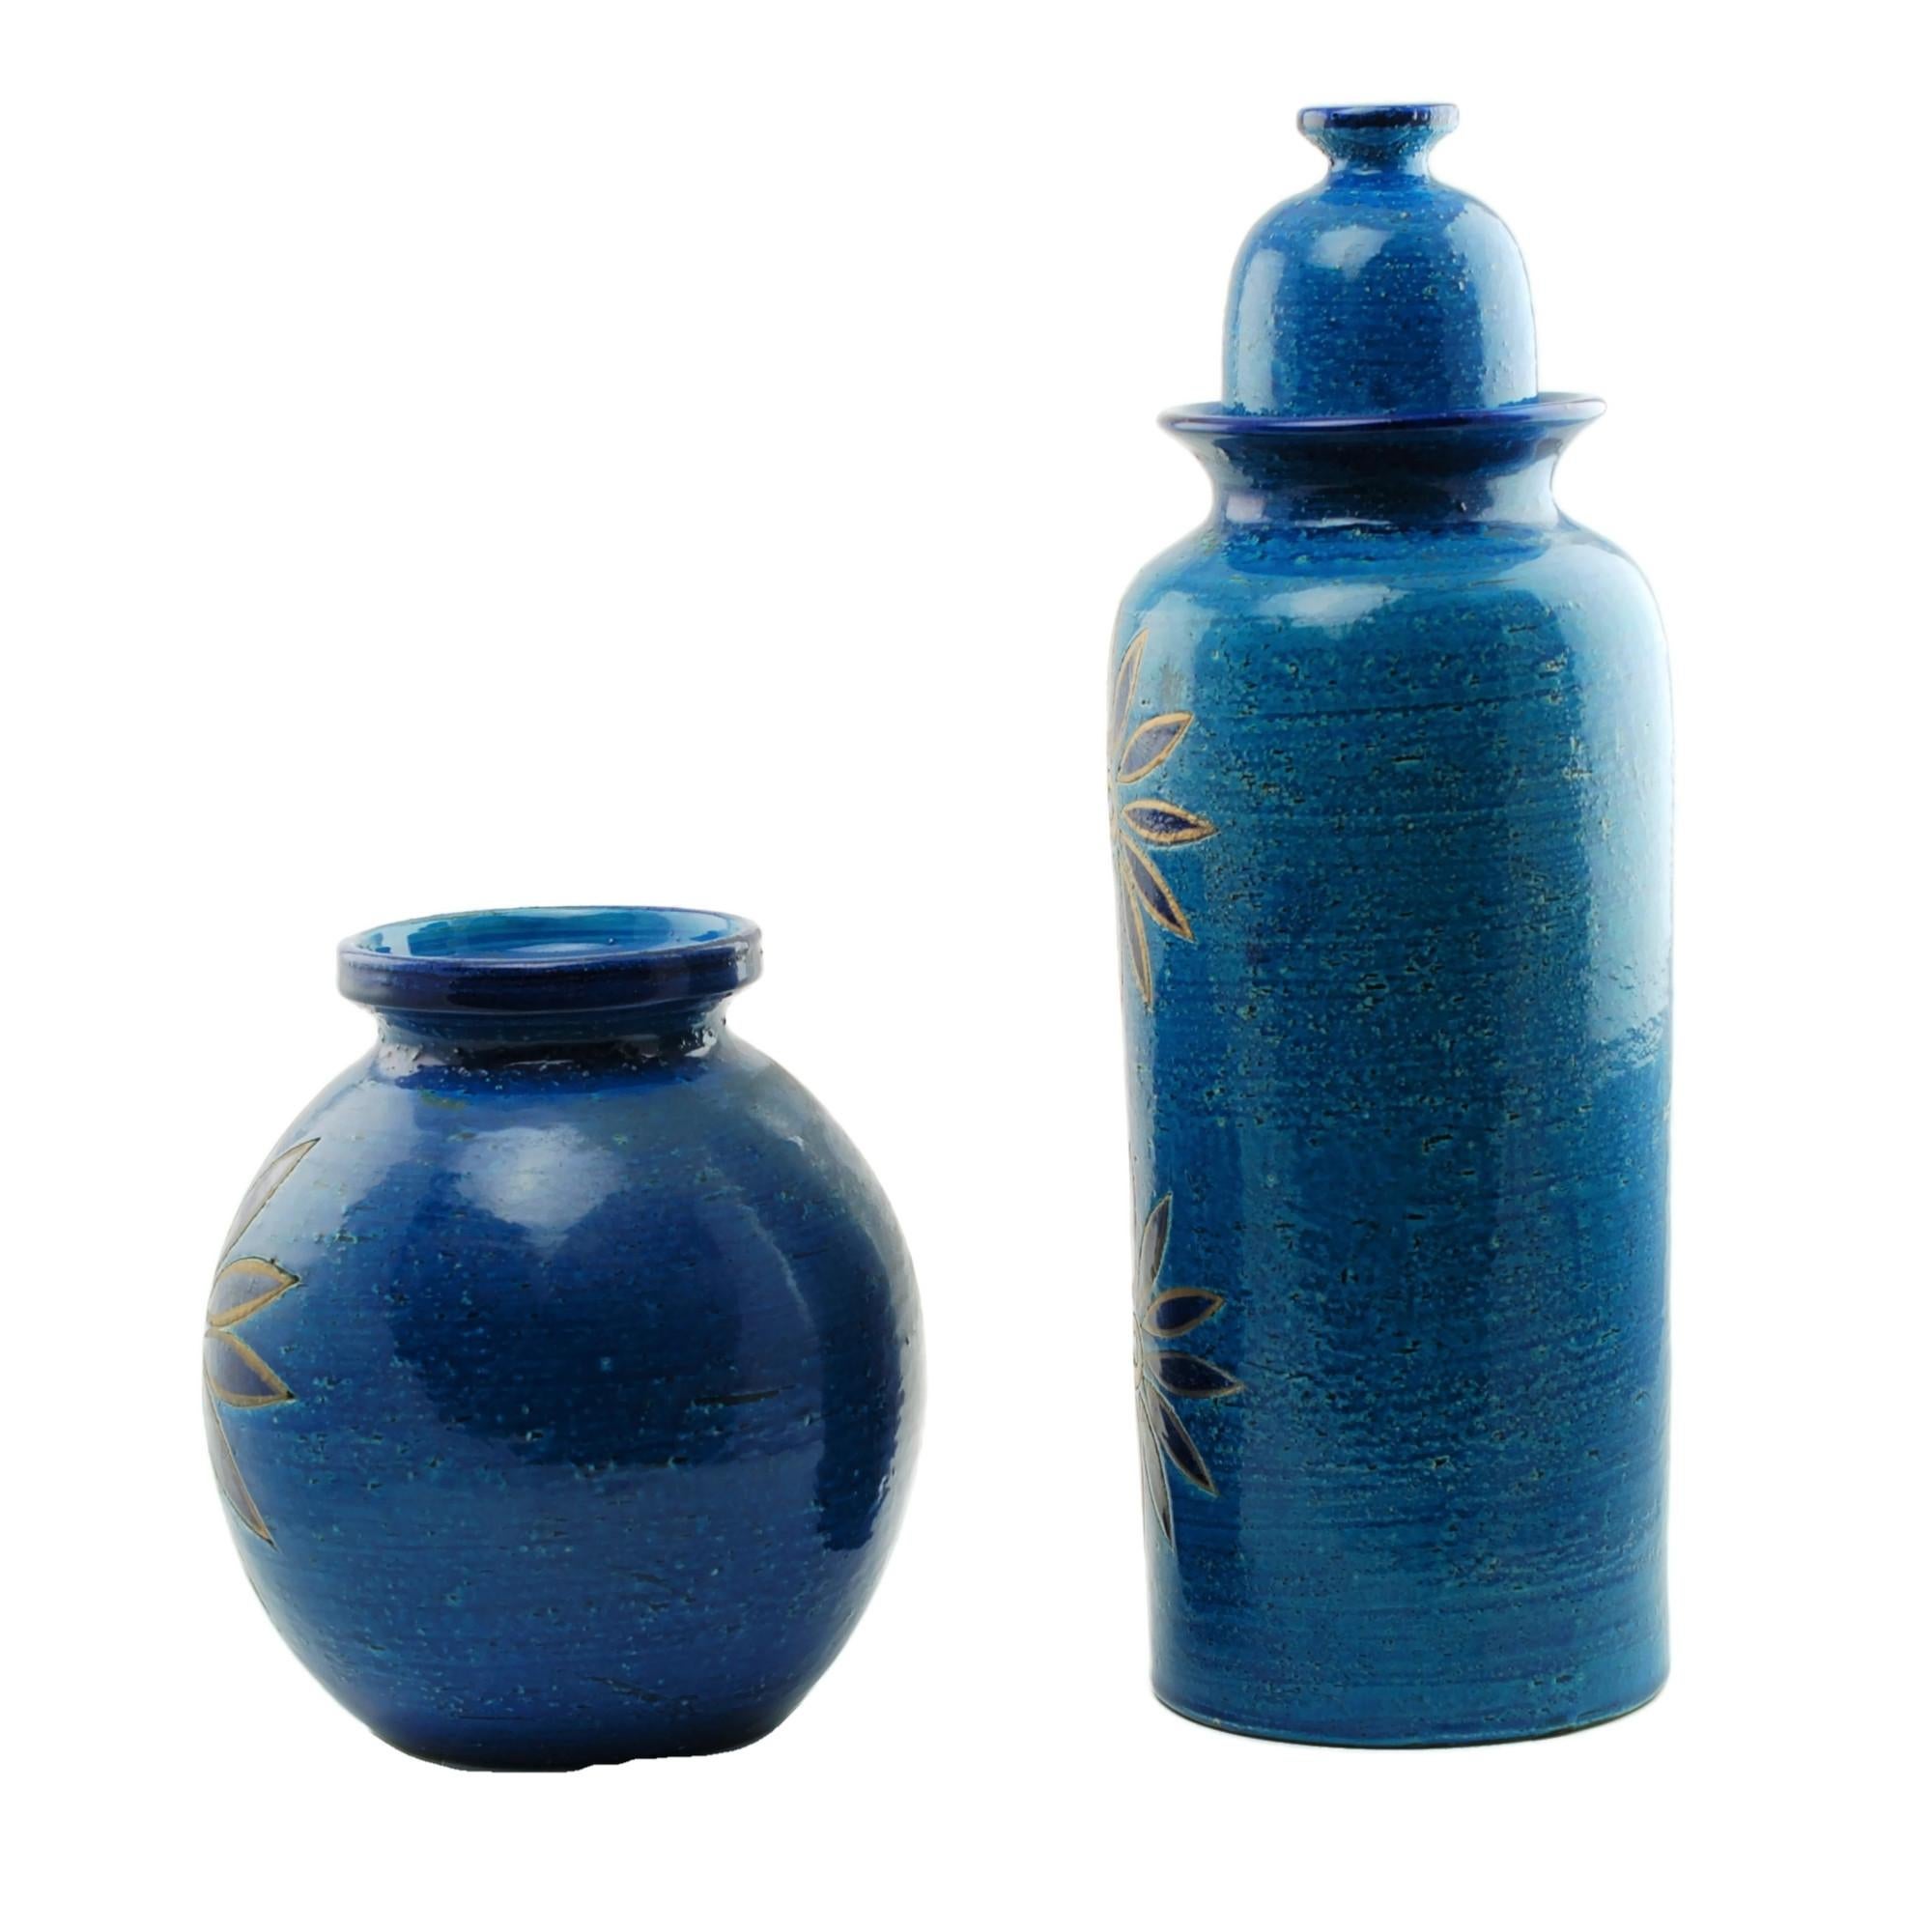 This ceramic vase and lidded jar were designed by Aldo Londi, art director for Bitossi ceramiche in Montelupo, Italy. Both pieces feature large stylized flowers and have been finished in Bitossi's rich Rimini blu glaze reminiscent of the Adriatic.